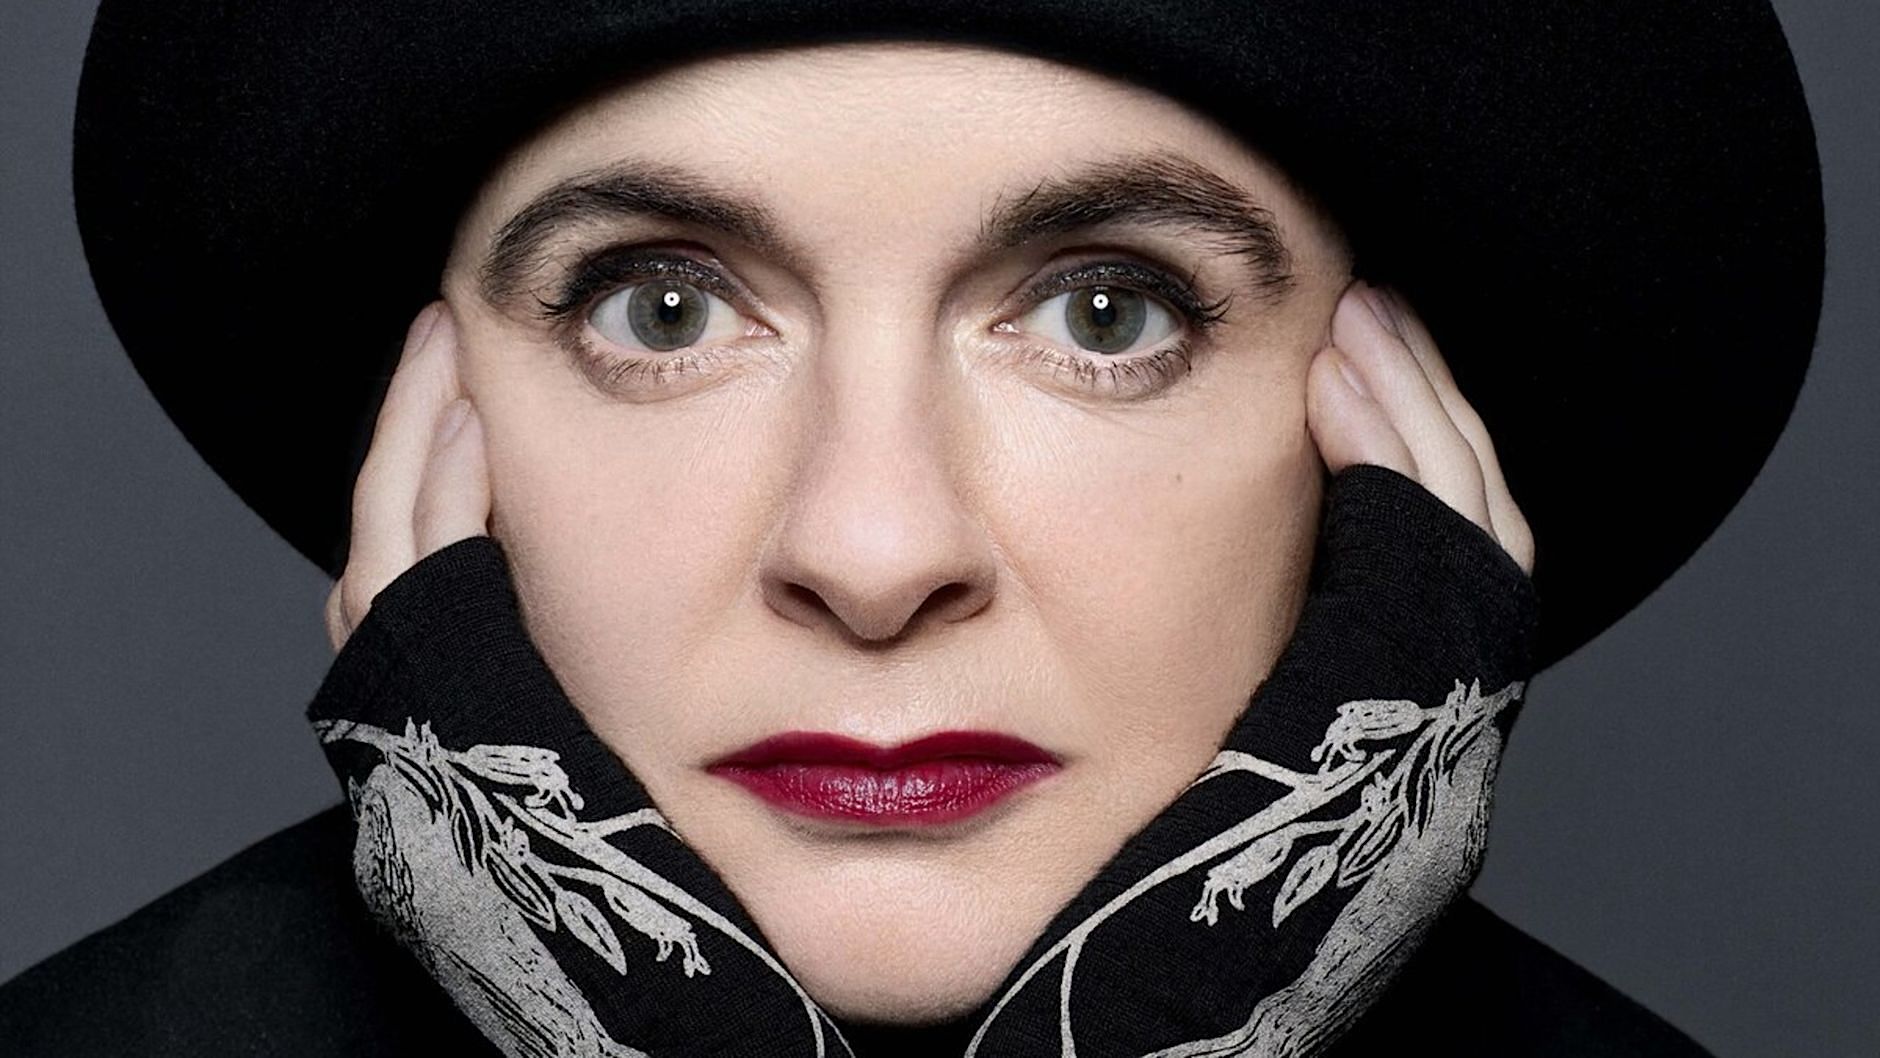 SOFT" OF AMELIE NOTHOMB - Chic & Furious